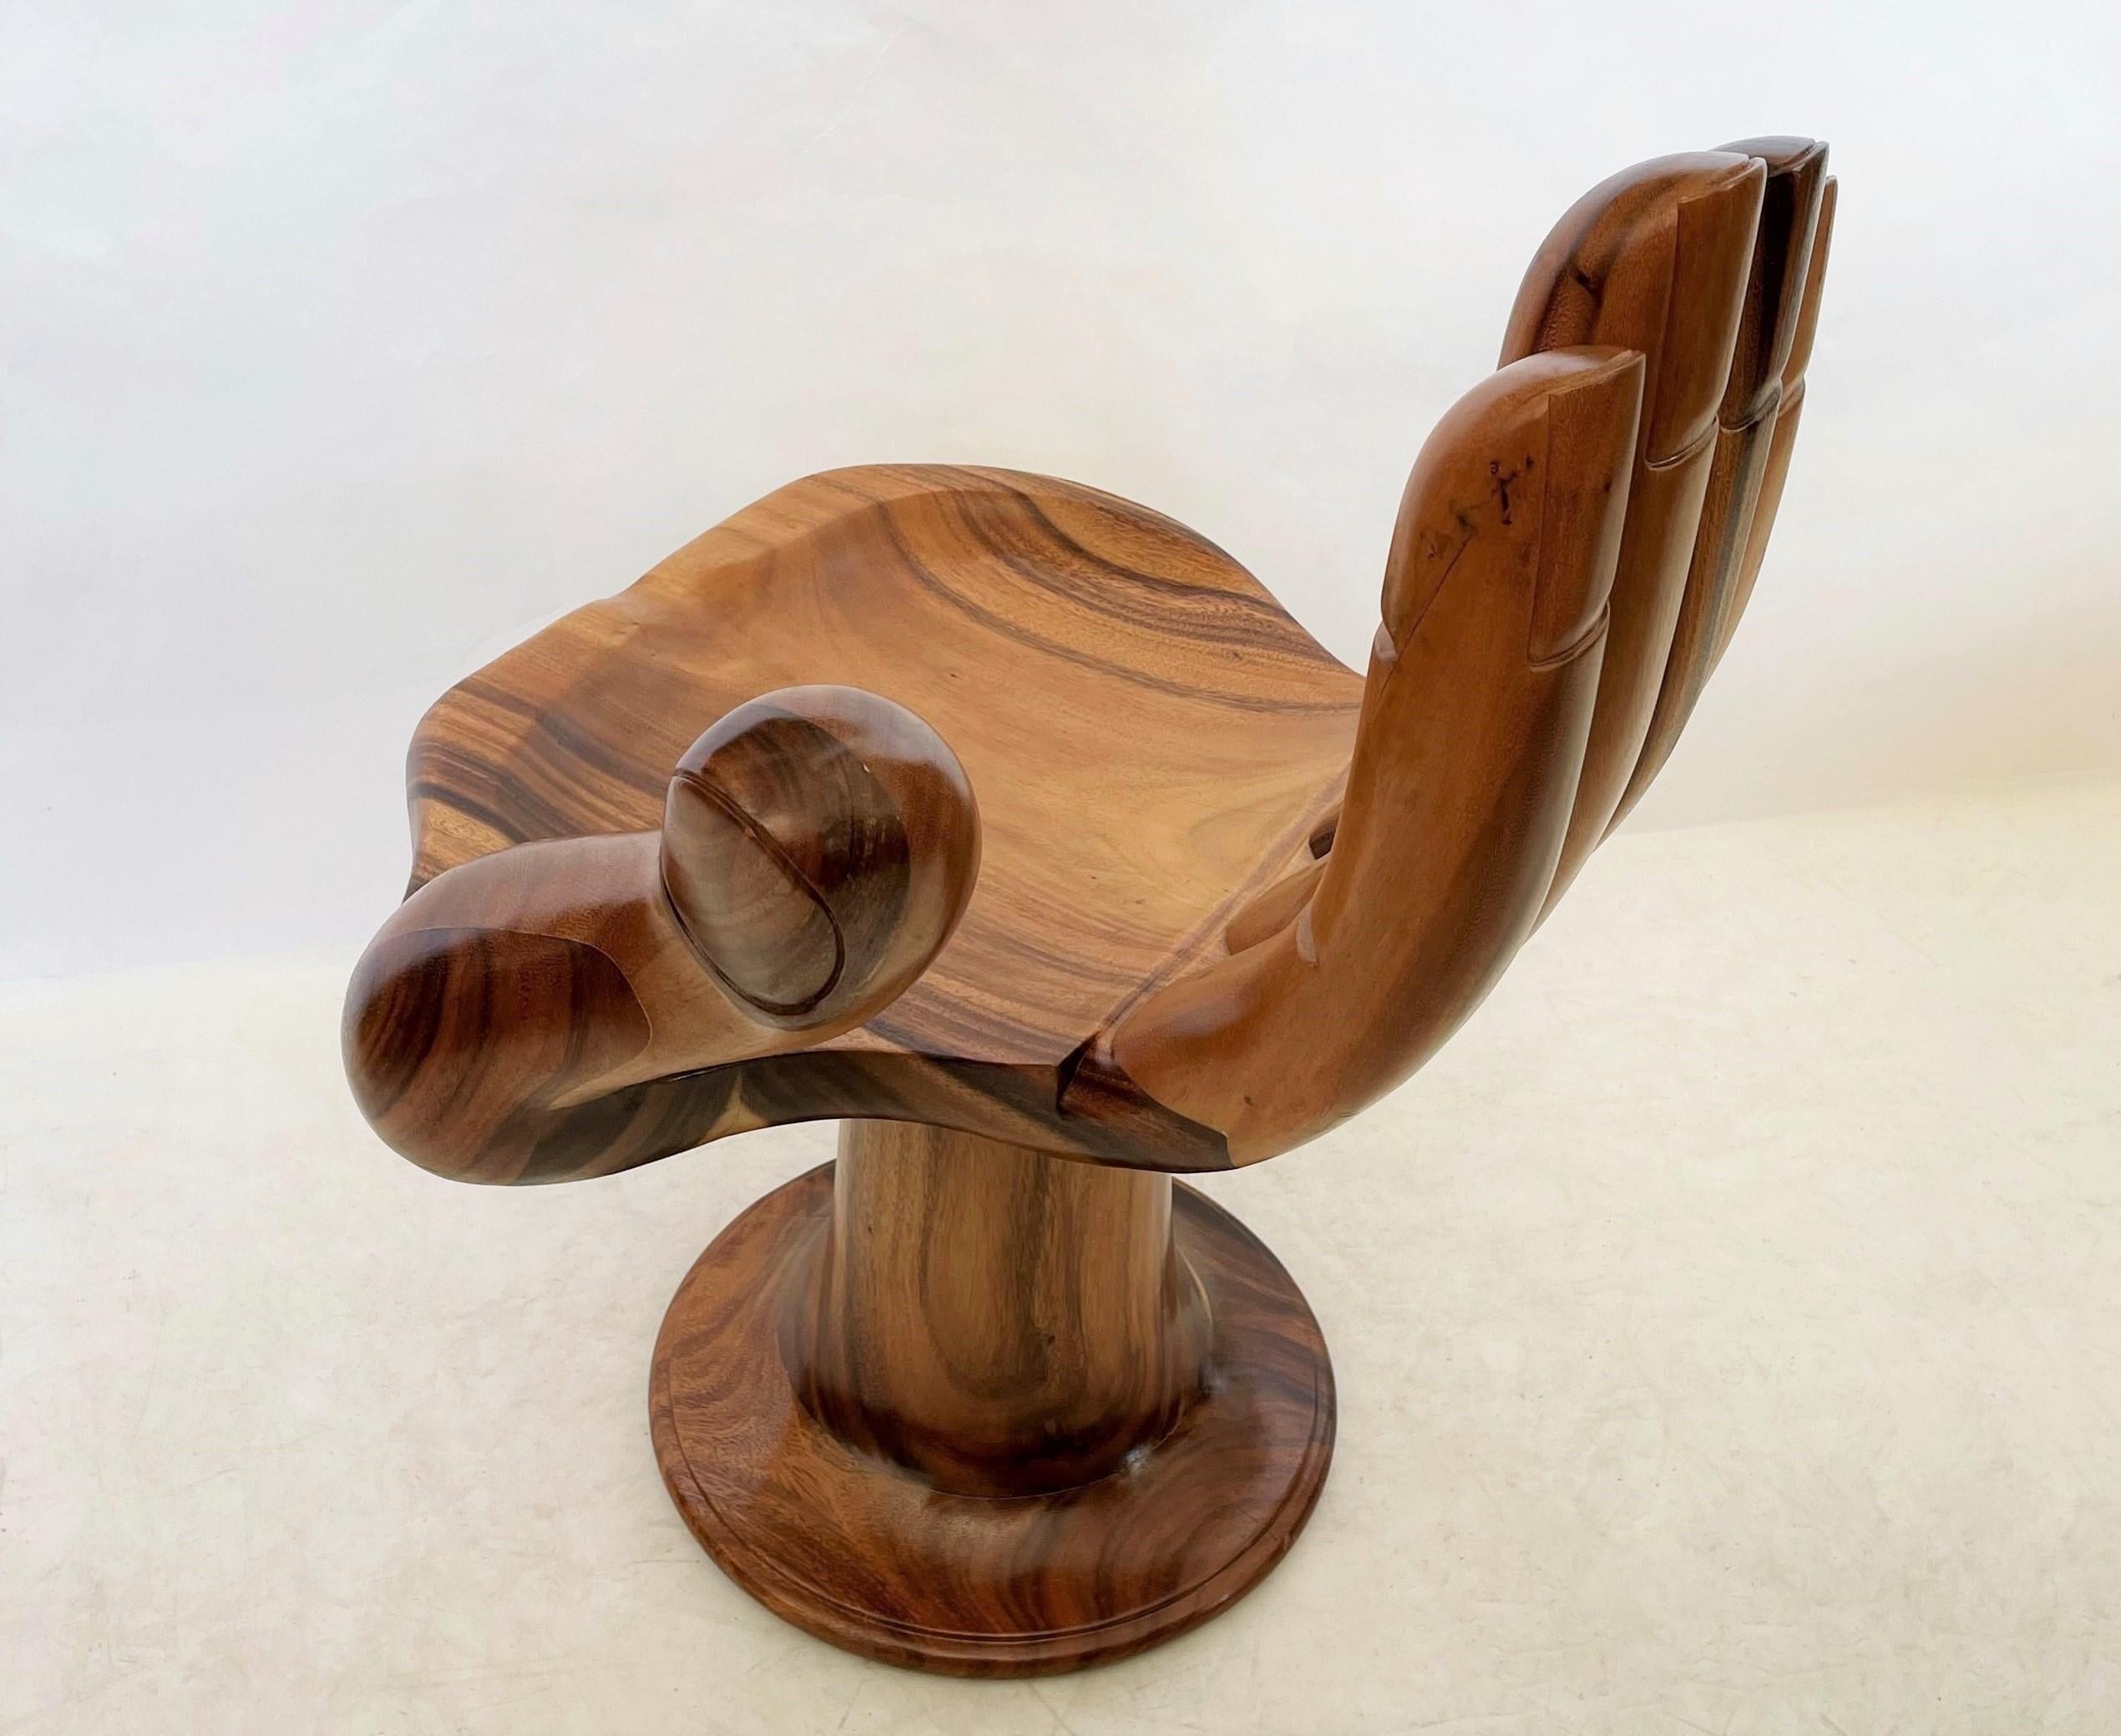 This Surrealist modern style hand chair is inspired by the original design of Pedro Friedeberg. Friedeberg is a designer known for his surrealist work filled with line colors and ancient and religious symbols. His best known piece is the